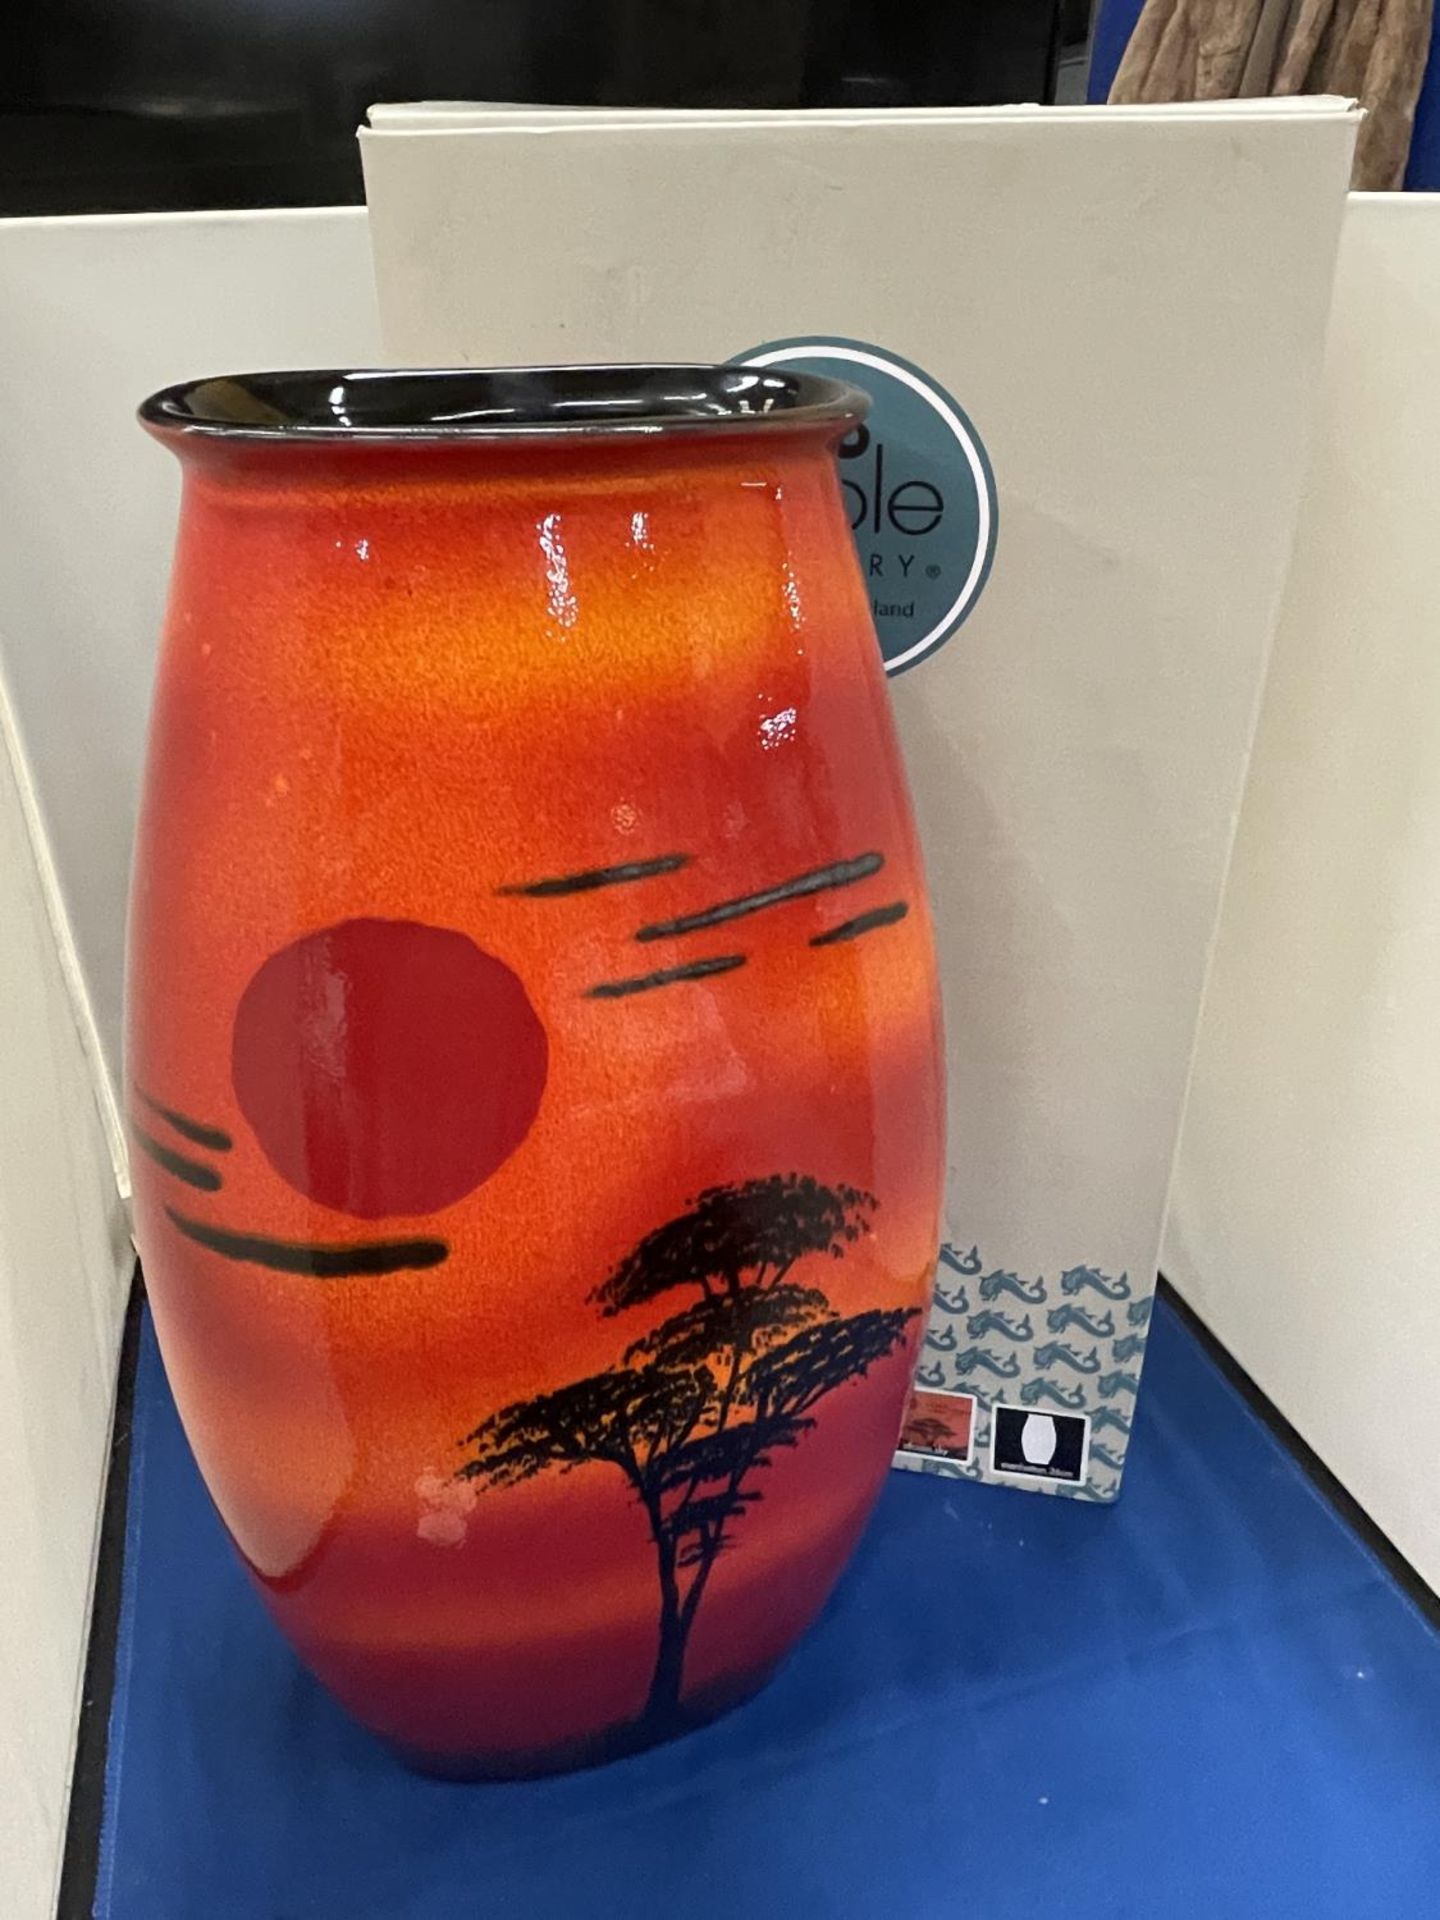 A POOLE POTTERY MANHATTON VASE WITH AFRICAN SKY DESIGN 36CM TALL WITH ORIGINAL BOX